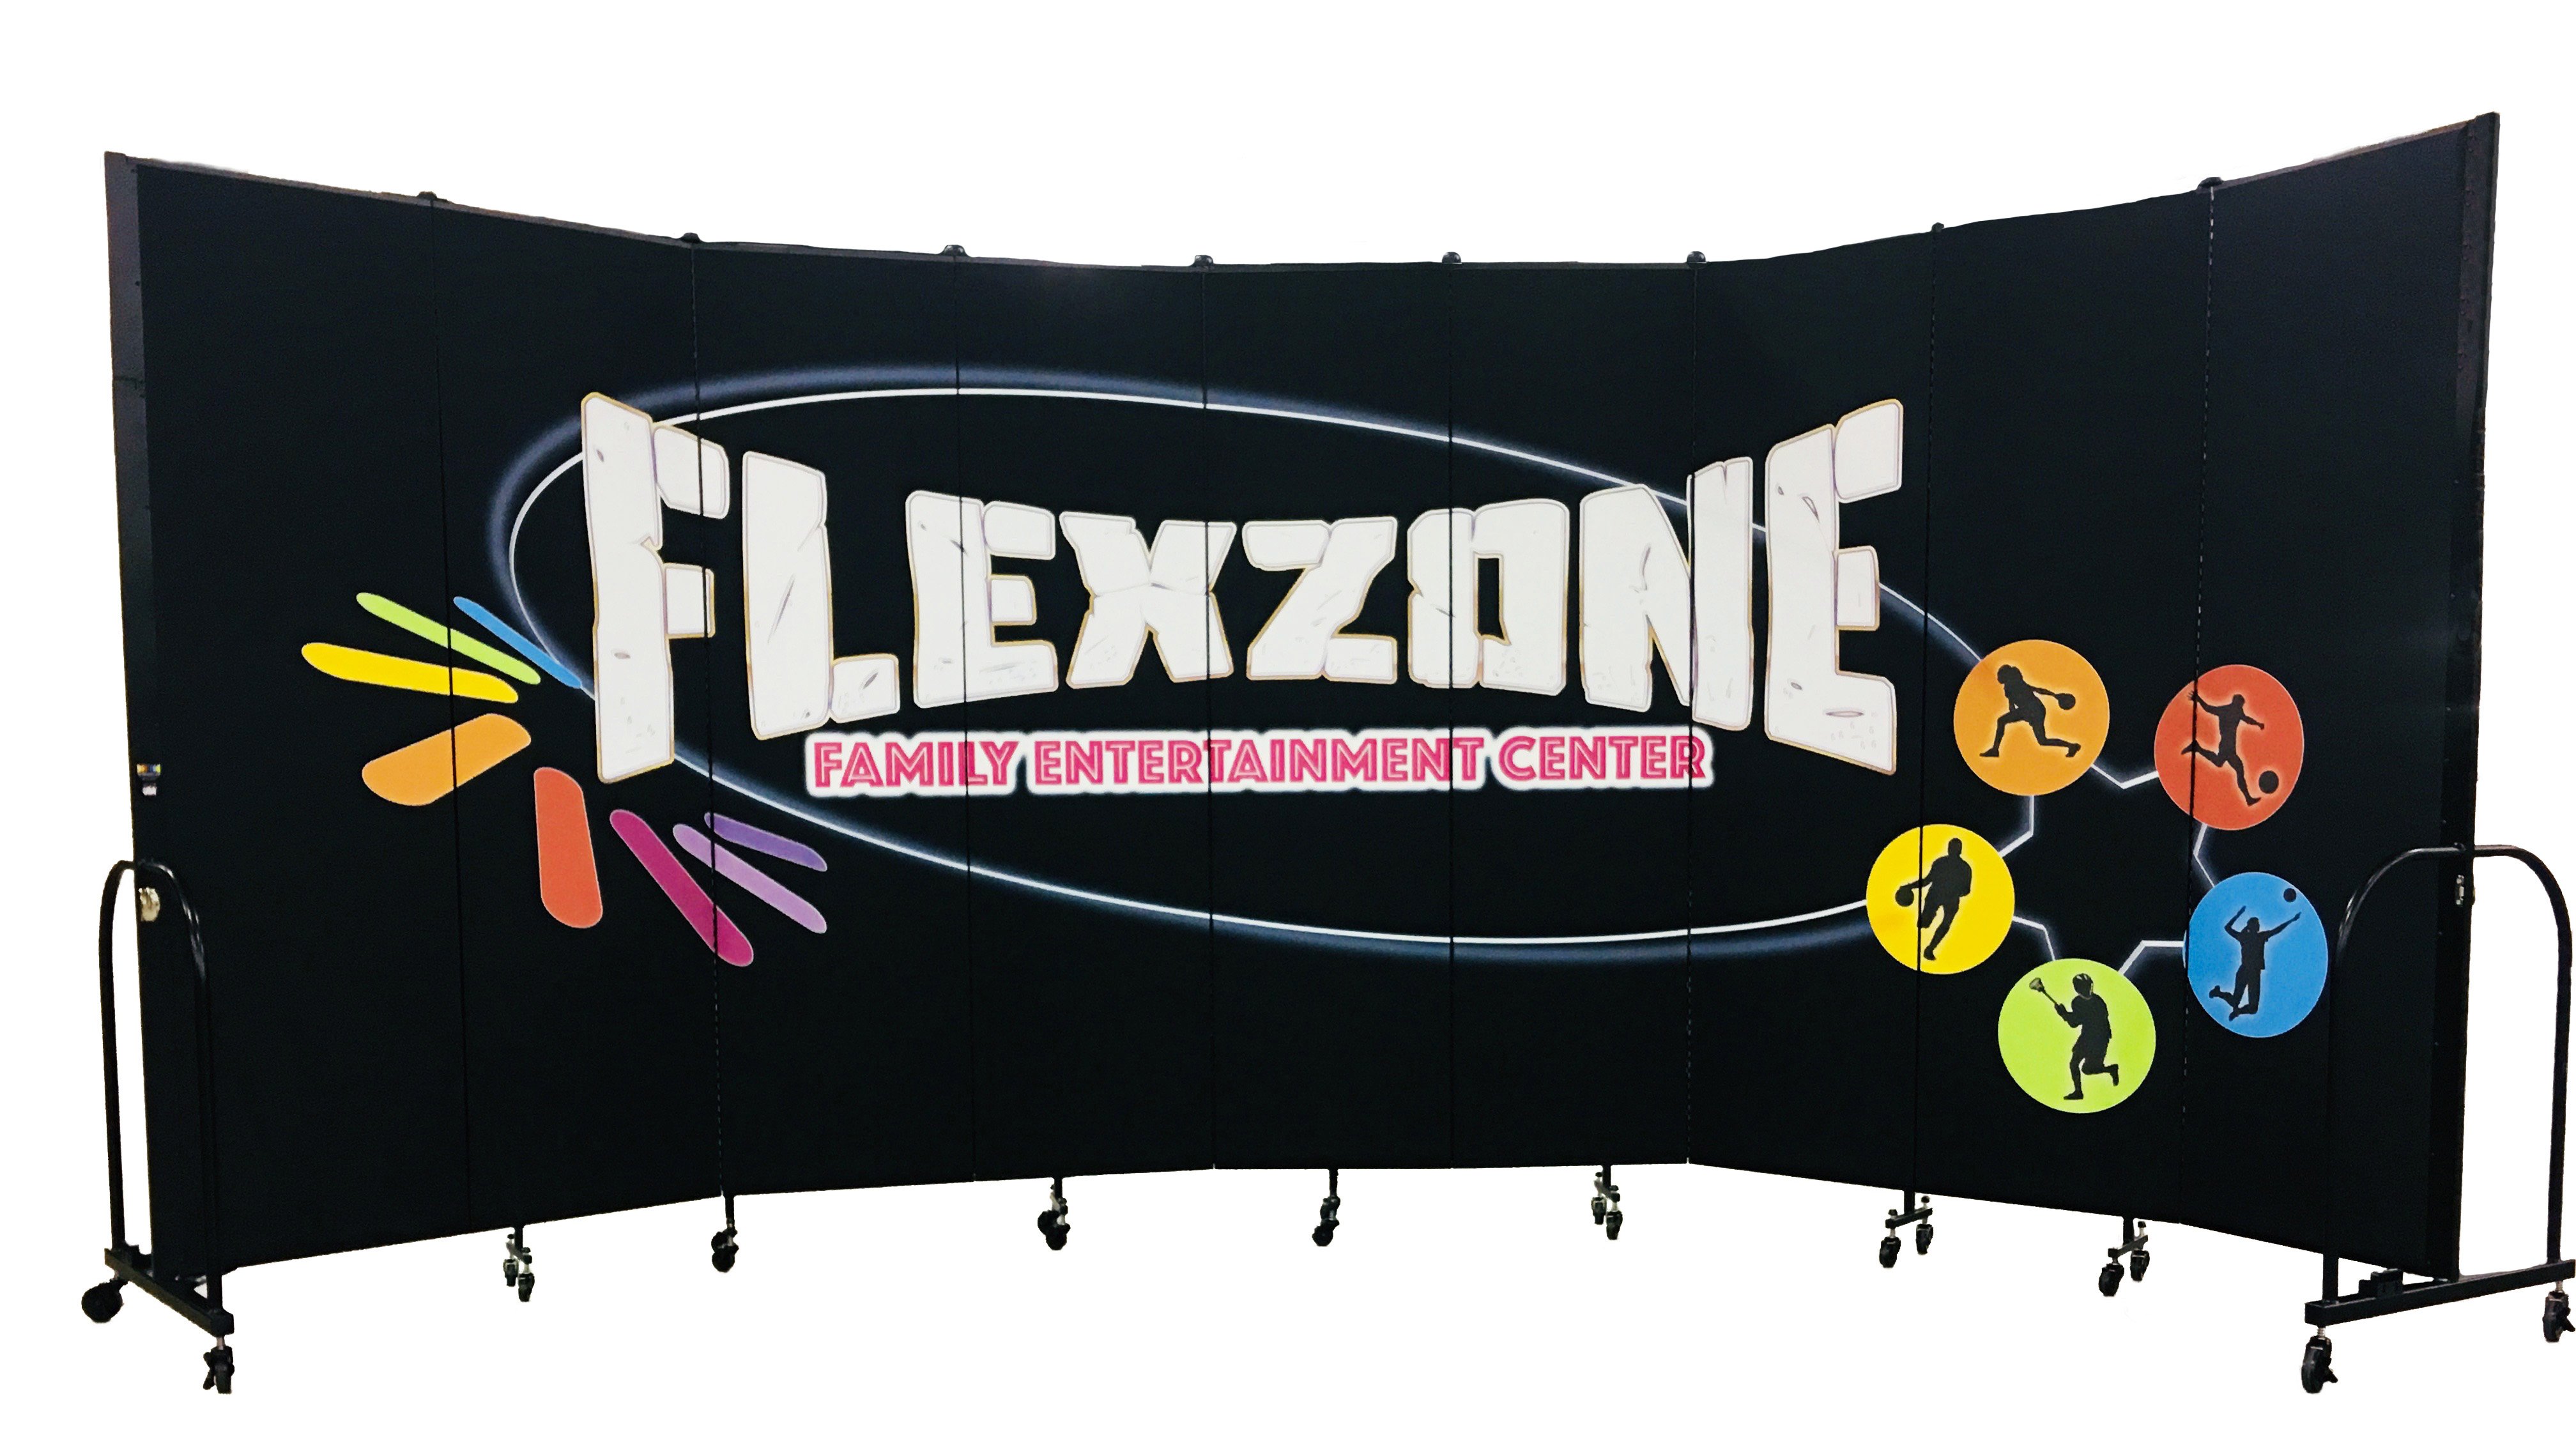 A mural titled Flexzone is printed on a black room divider